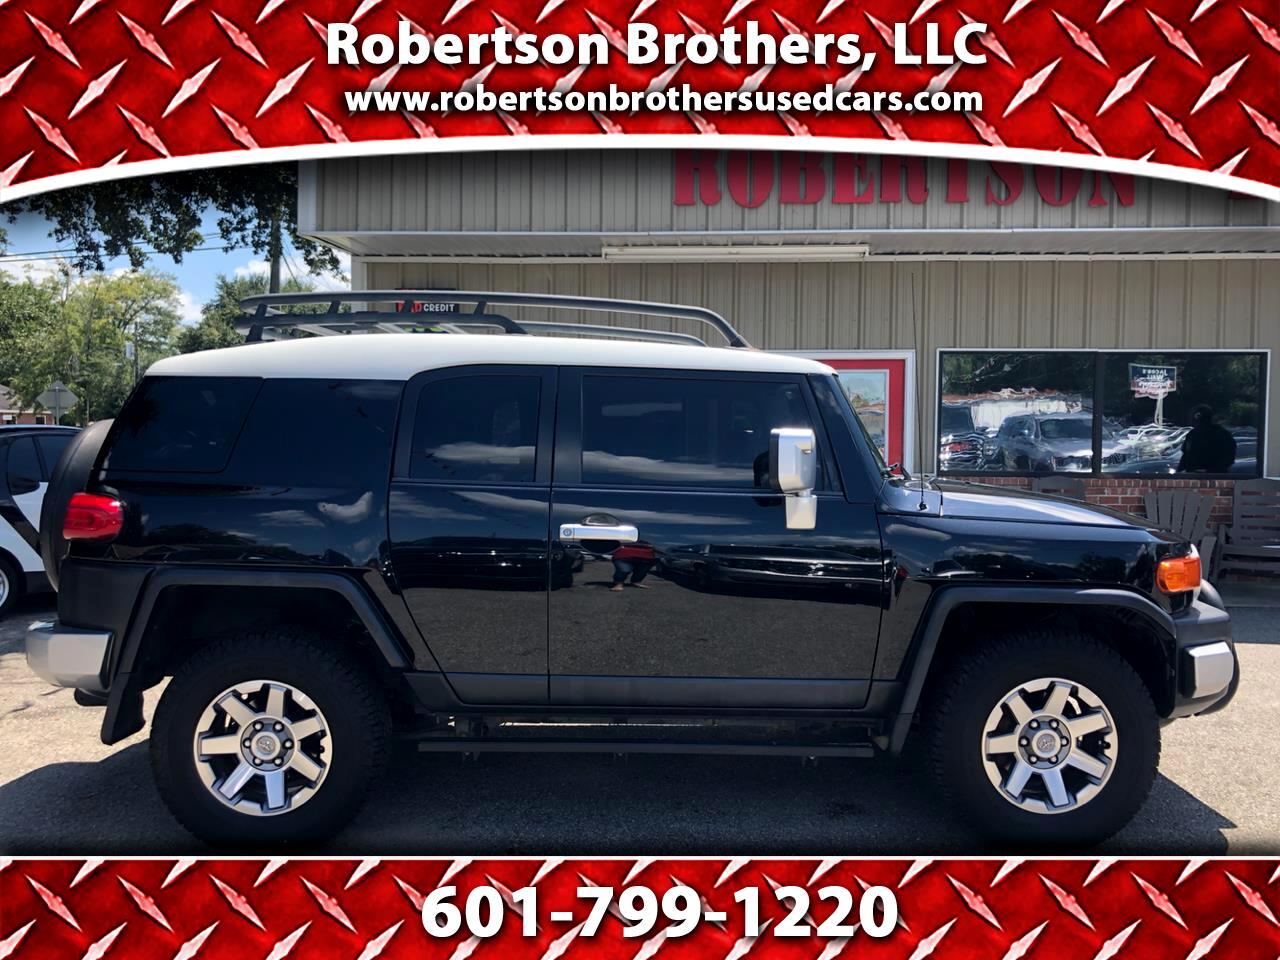 Used 2007 Toyota Fj Cruiser 4wd For Sale In Picayune Ms 39466